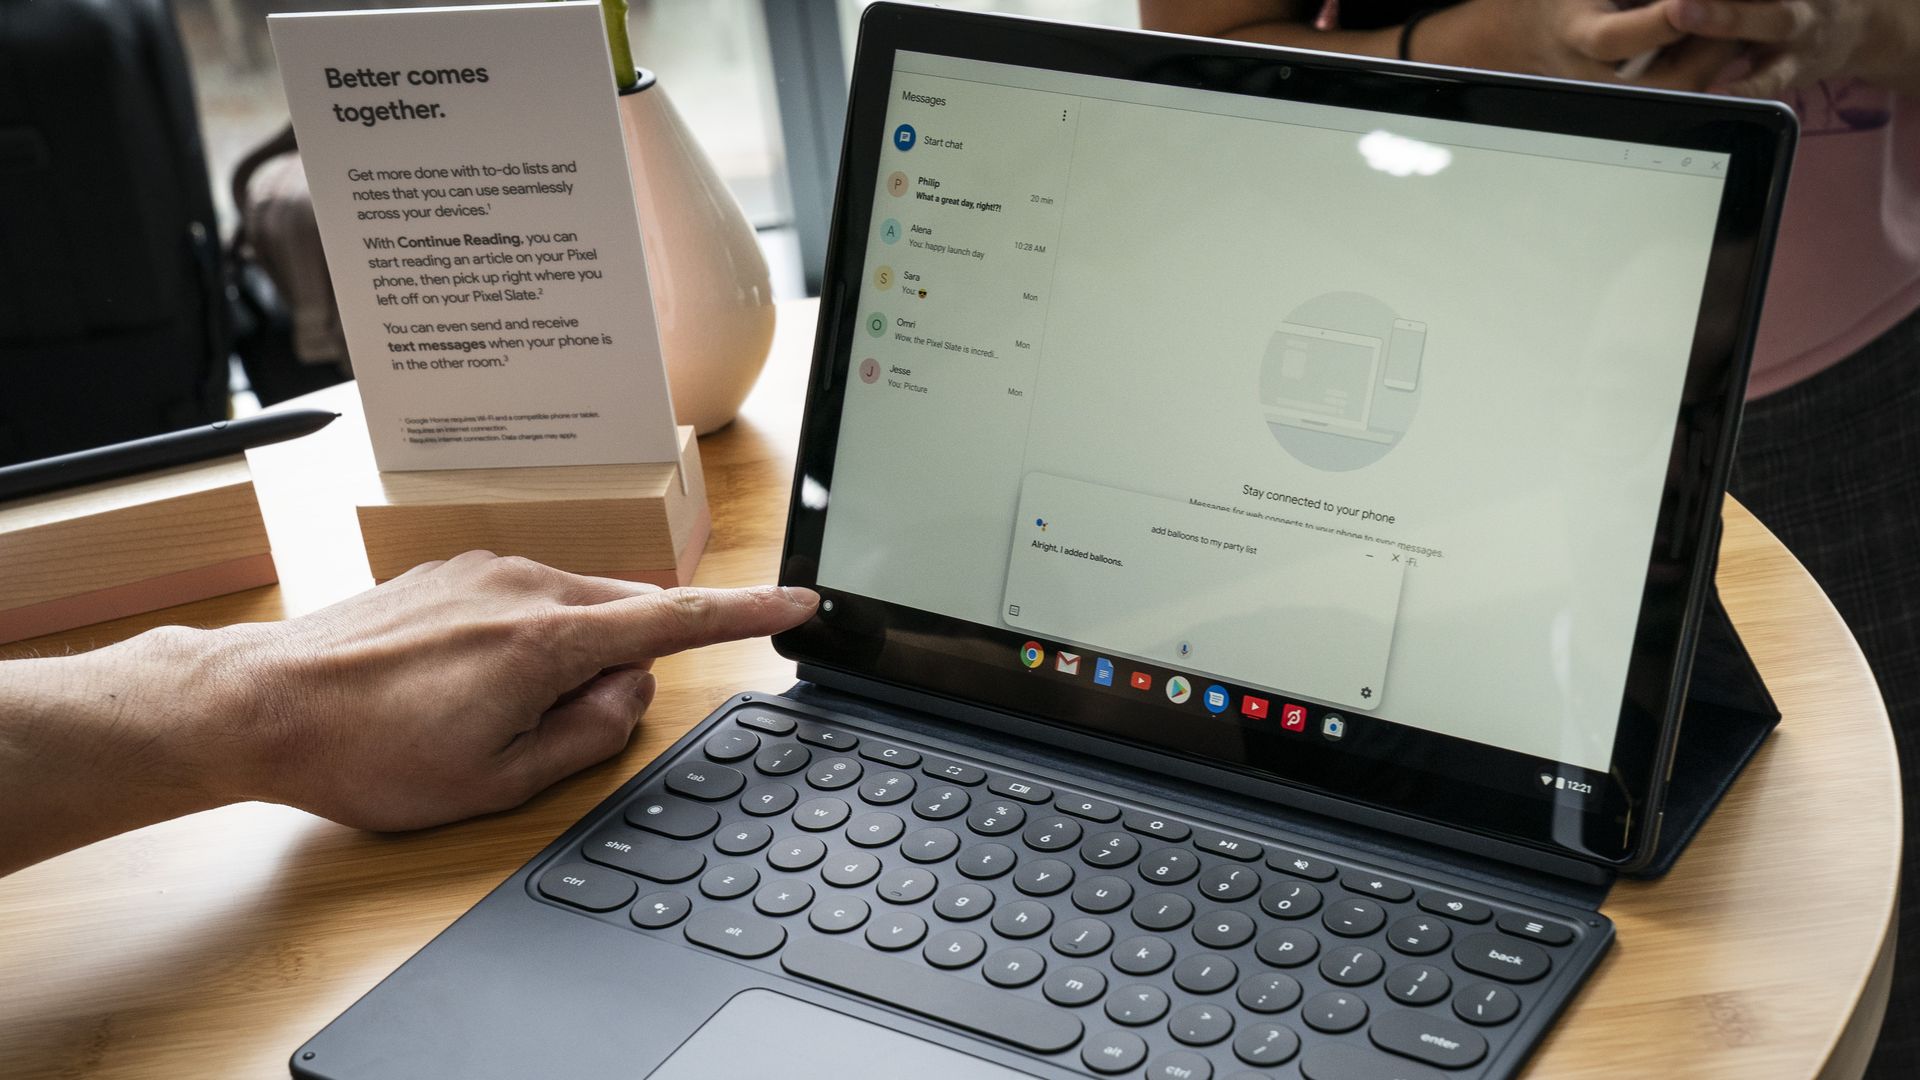 This image shows someone reaching for the keyboard of a Pixel Slate that's sitting on a table.